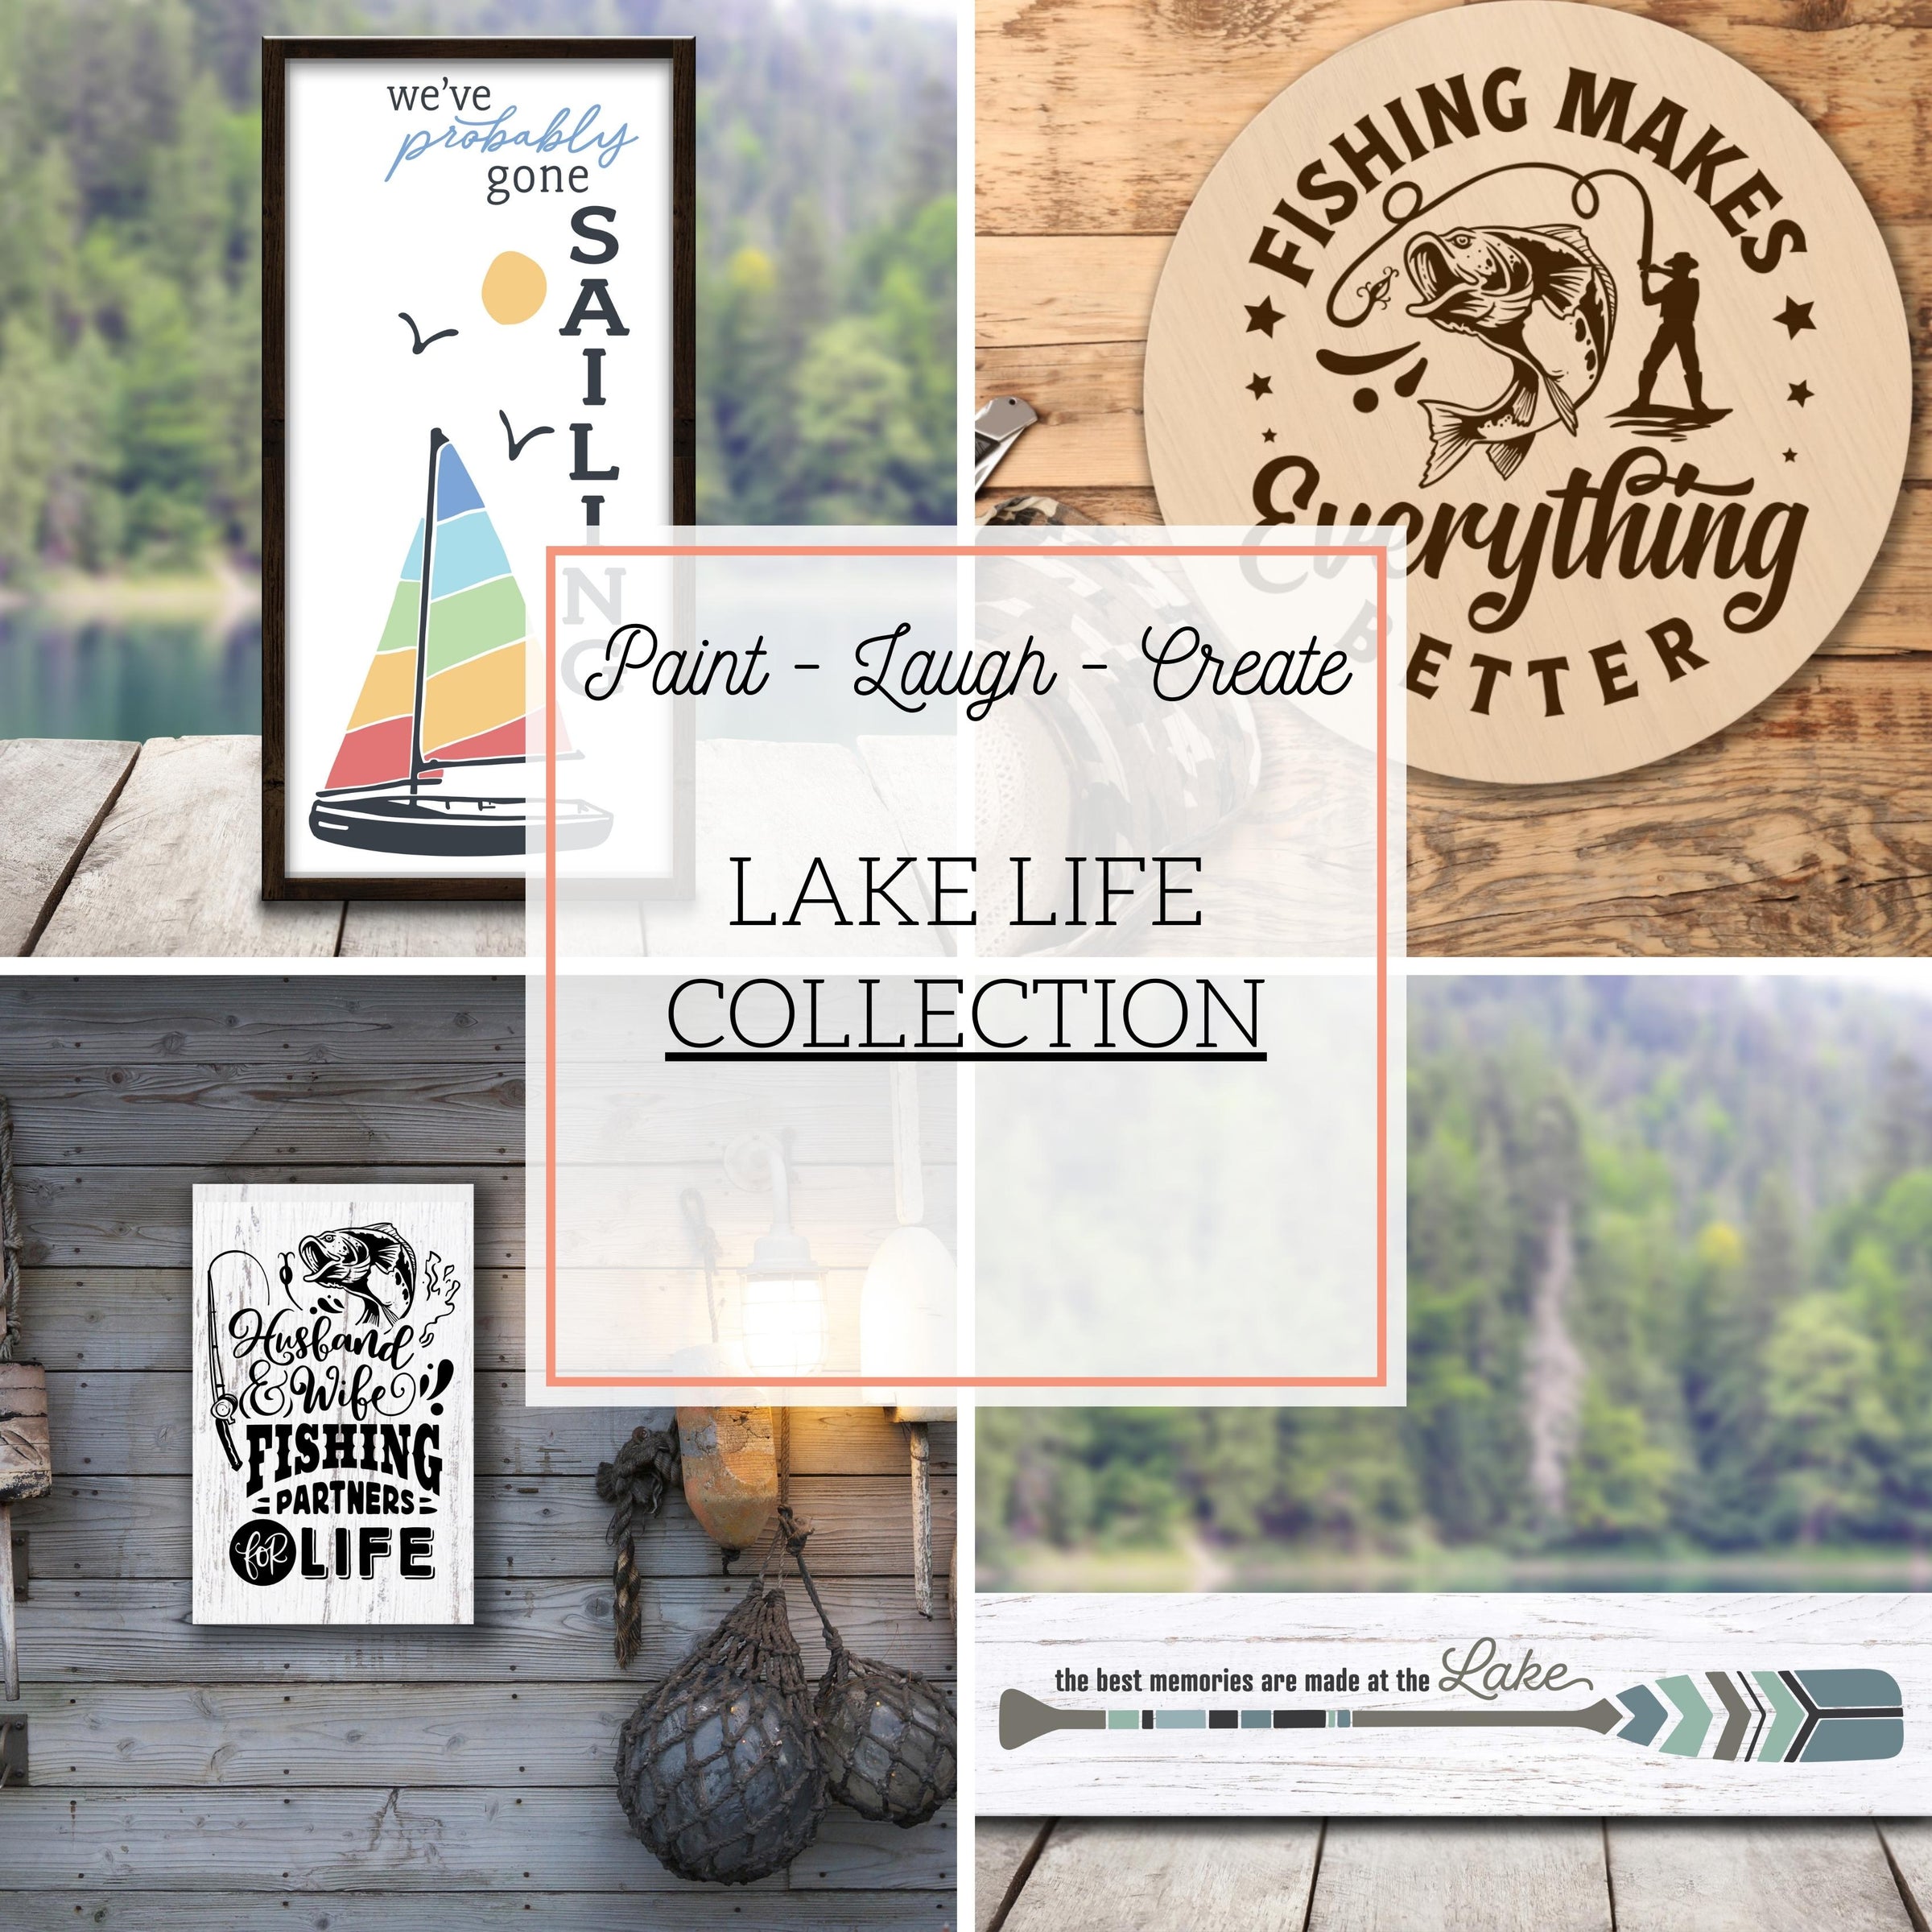 Framed signs, door hangers, planks and pallet signs with designs painted on them.